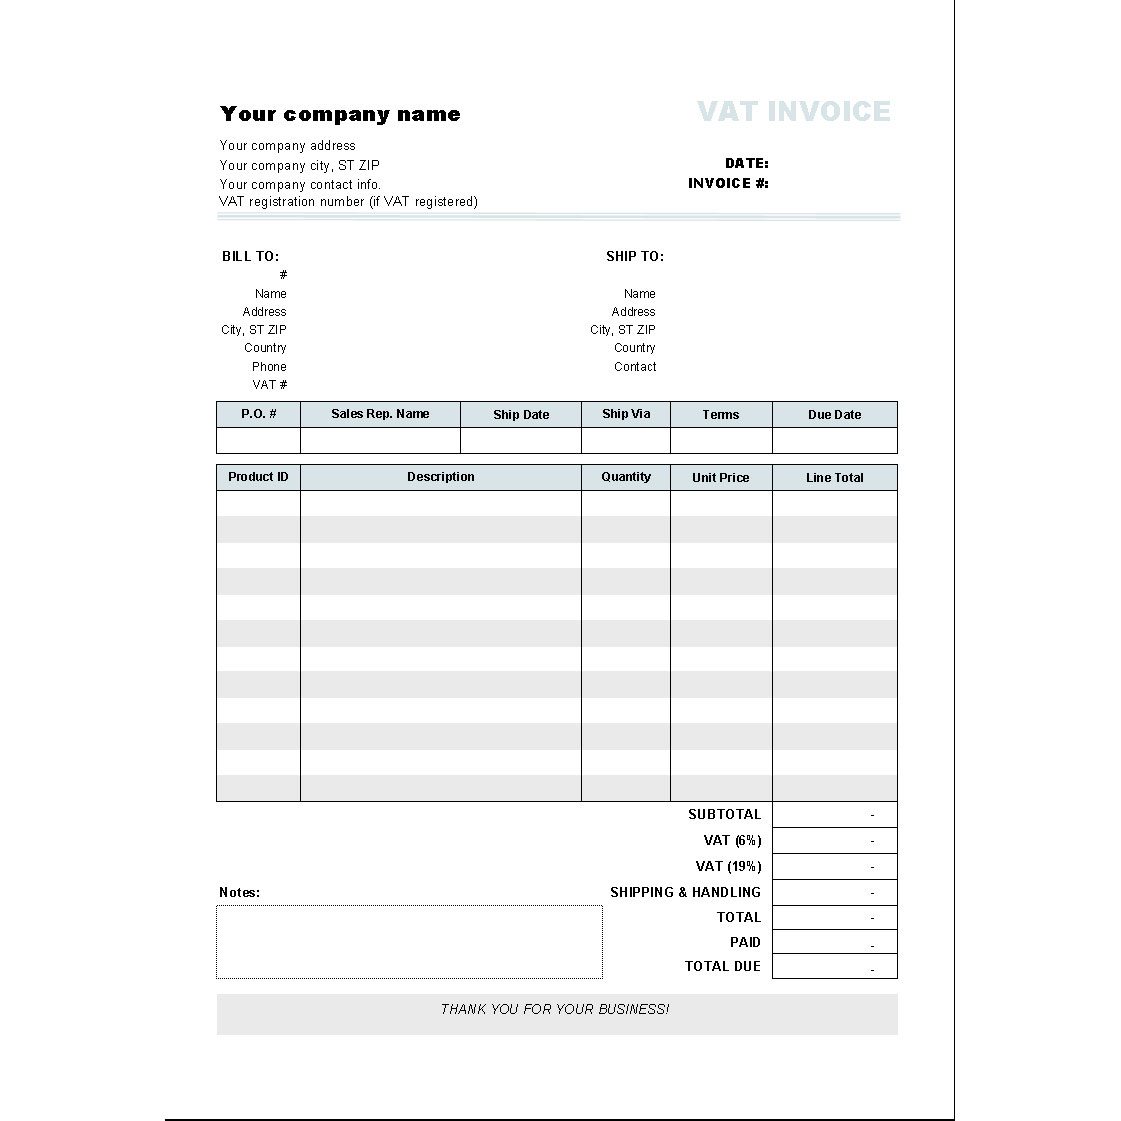 invoice home sign in